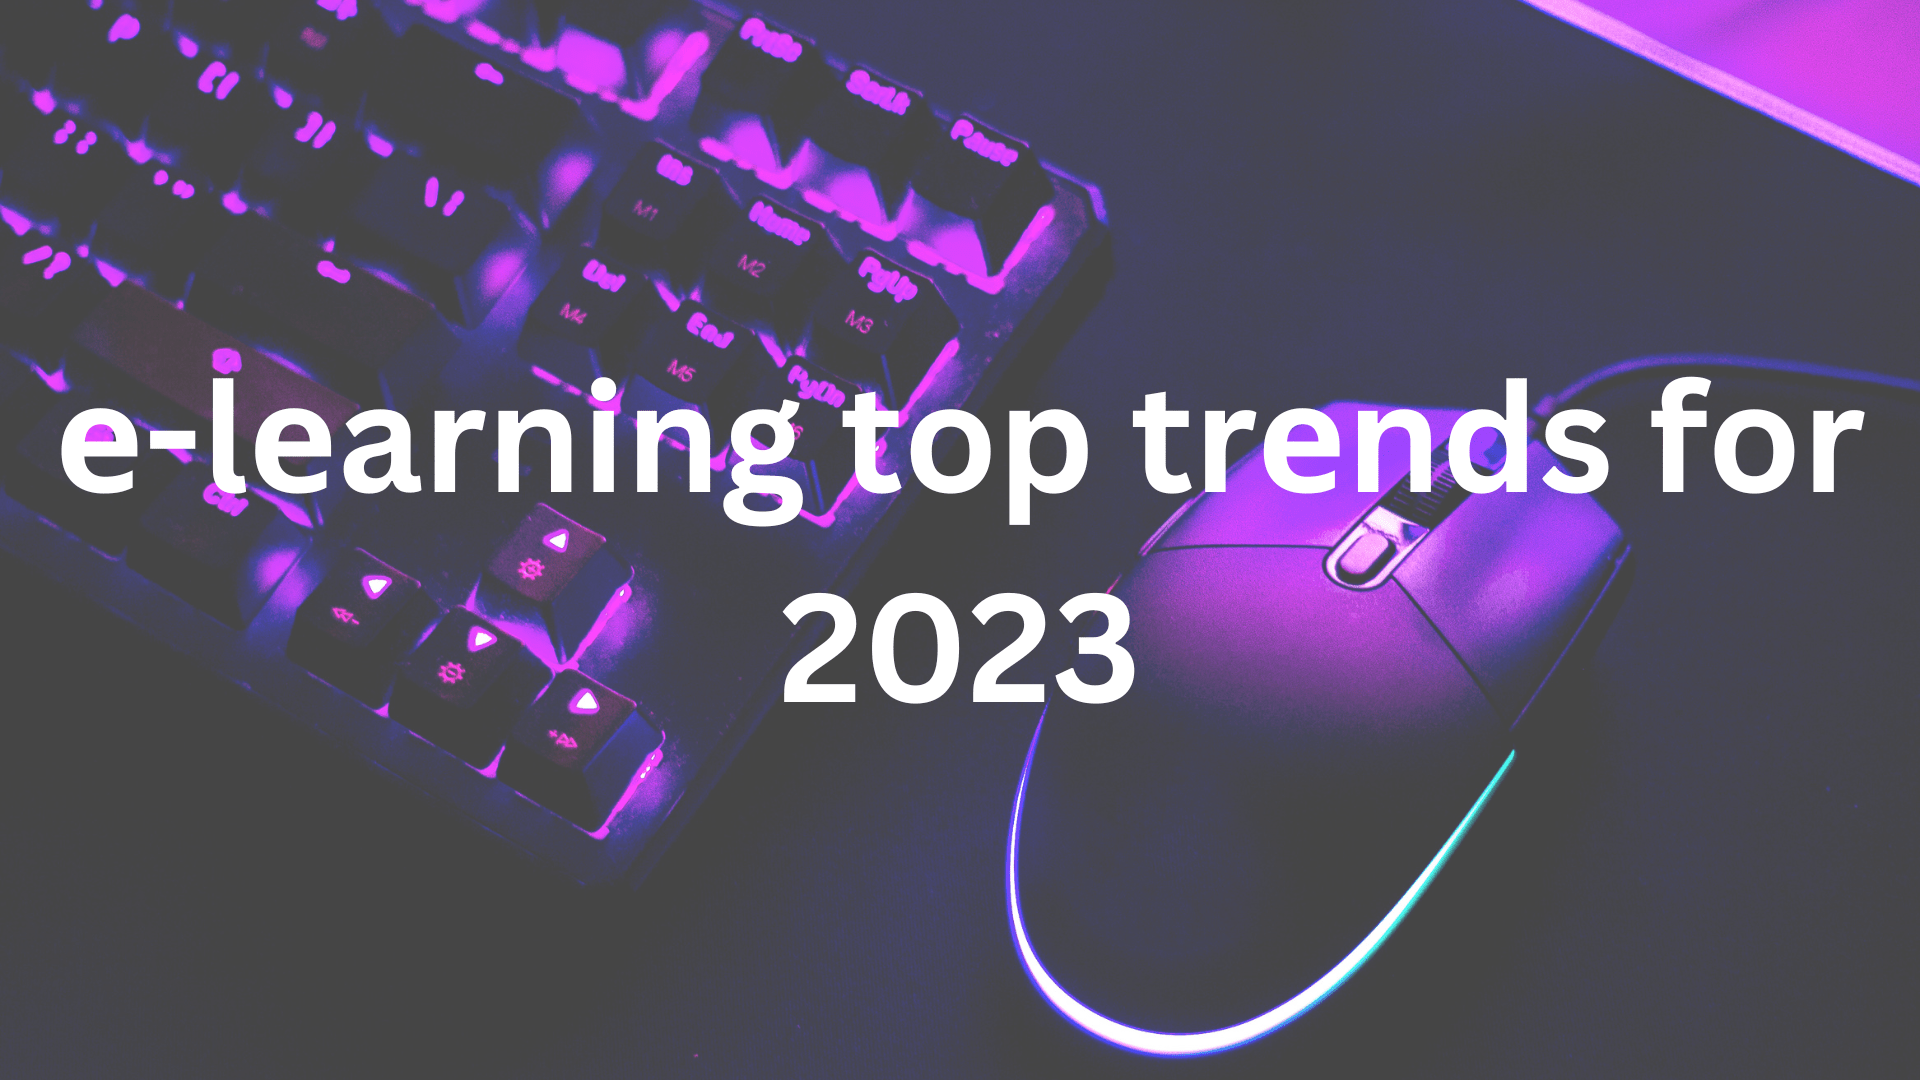 eLearning trends of 2023